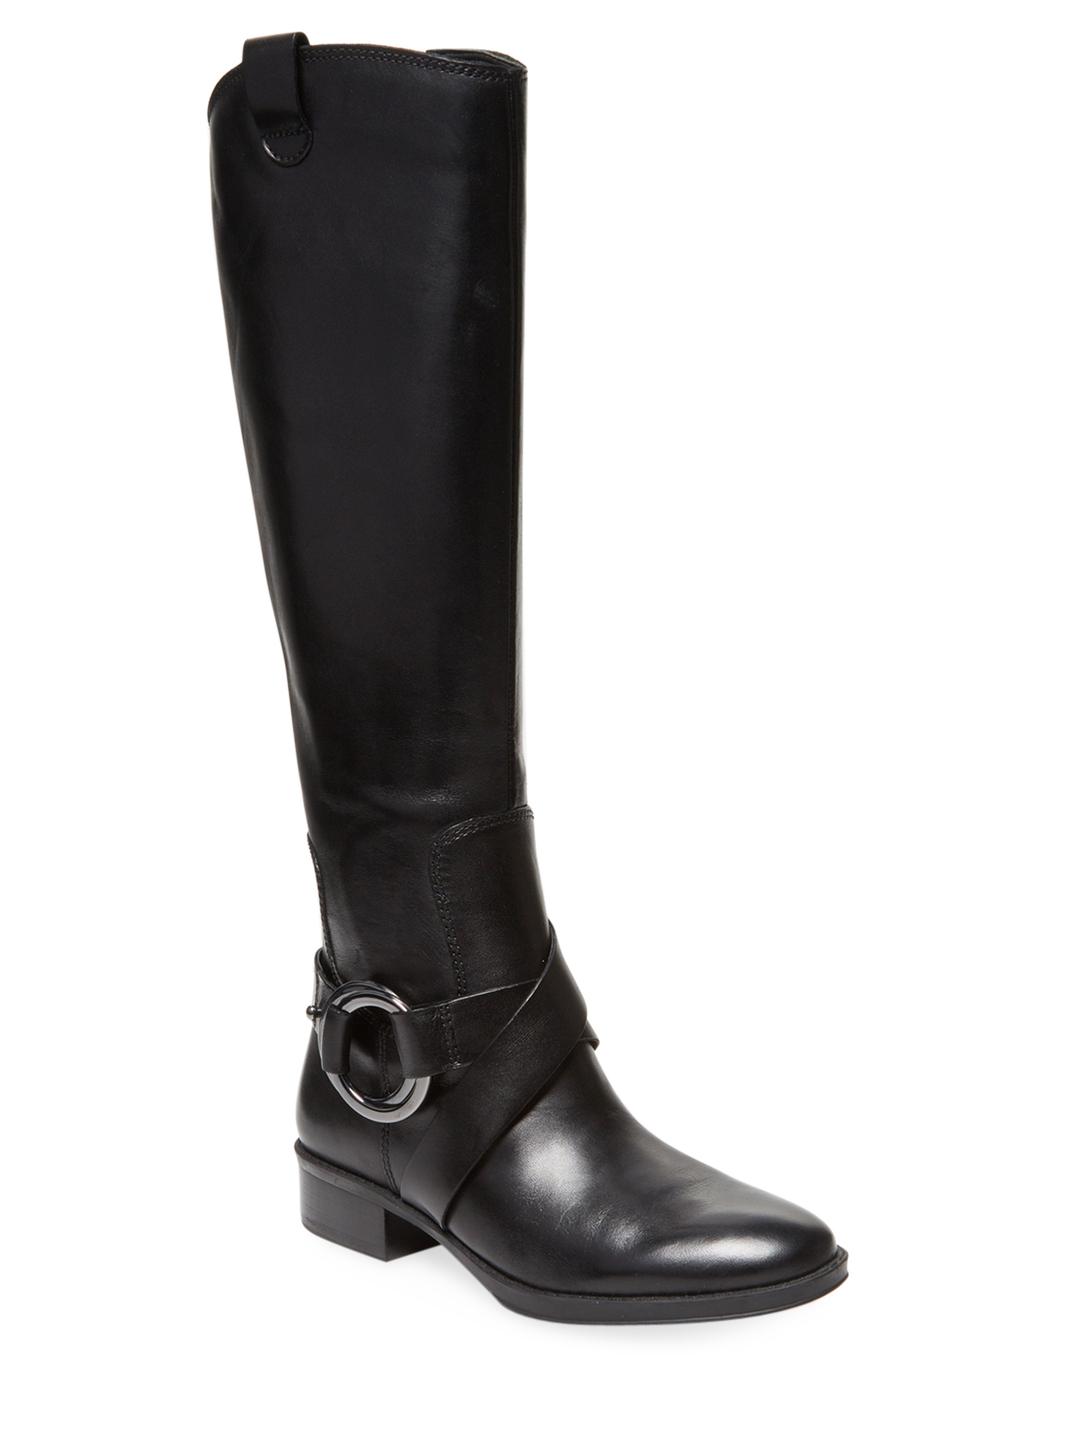 Lyst - Karl Lagerfeld Muret Leather Boot in Black